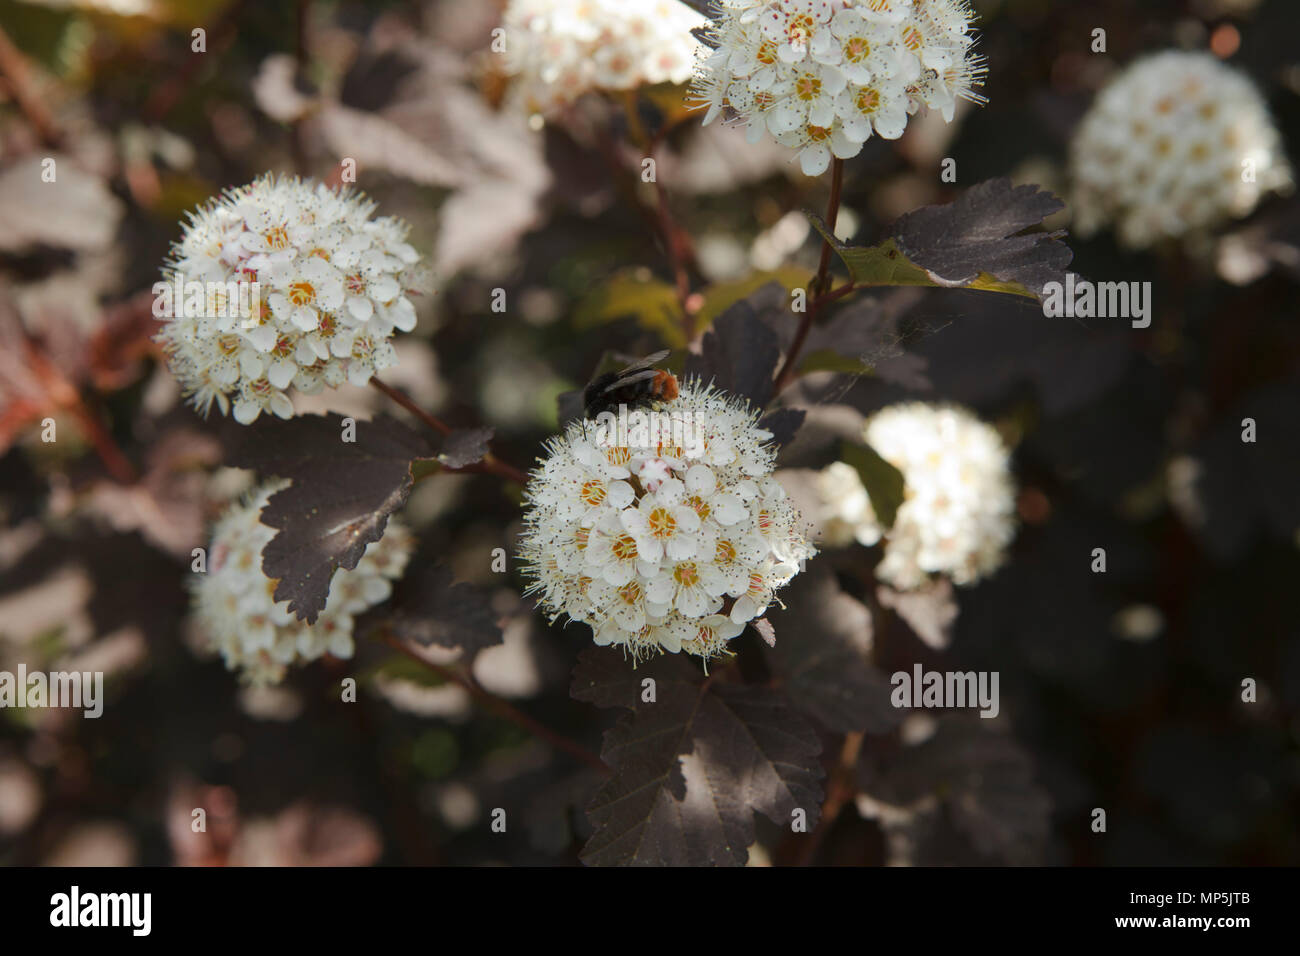 small, delicate white flowers on shrub's twig Stock Photo